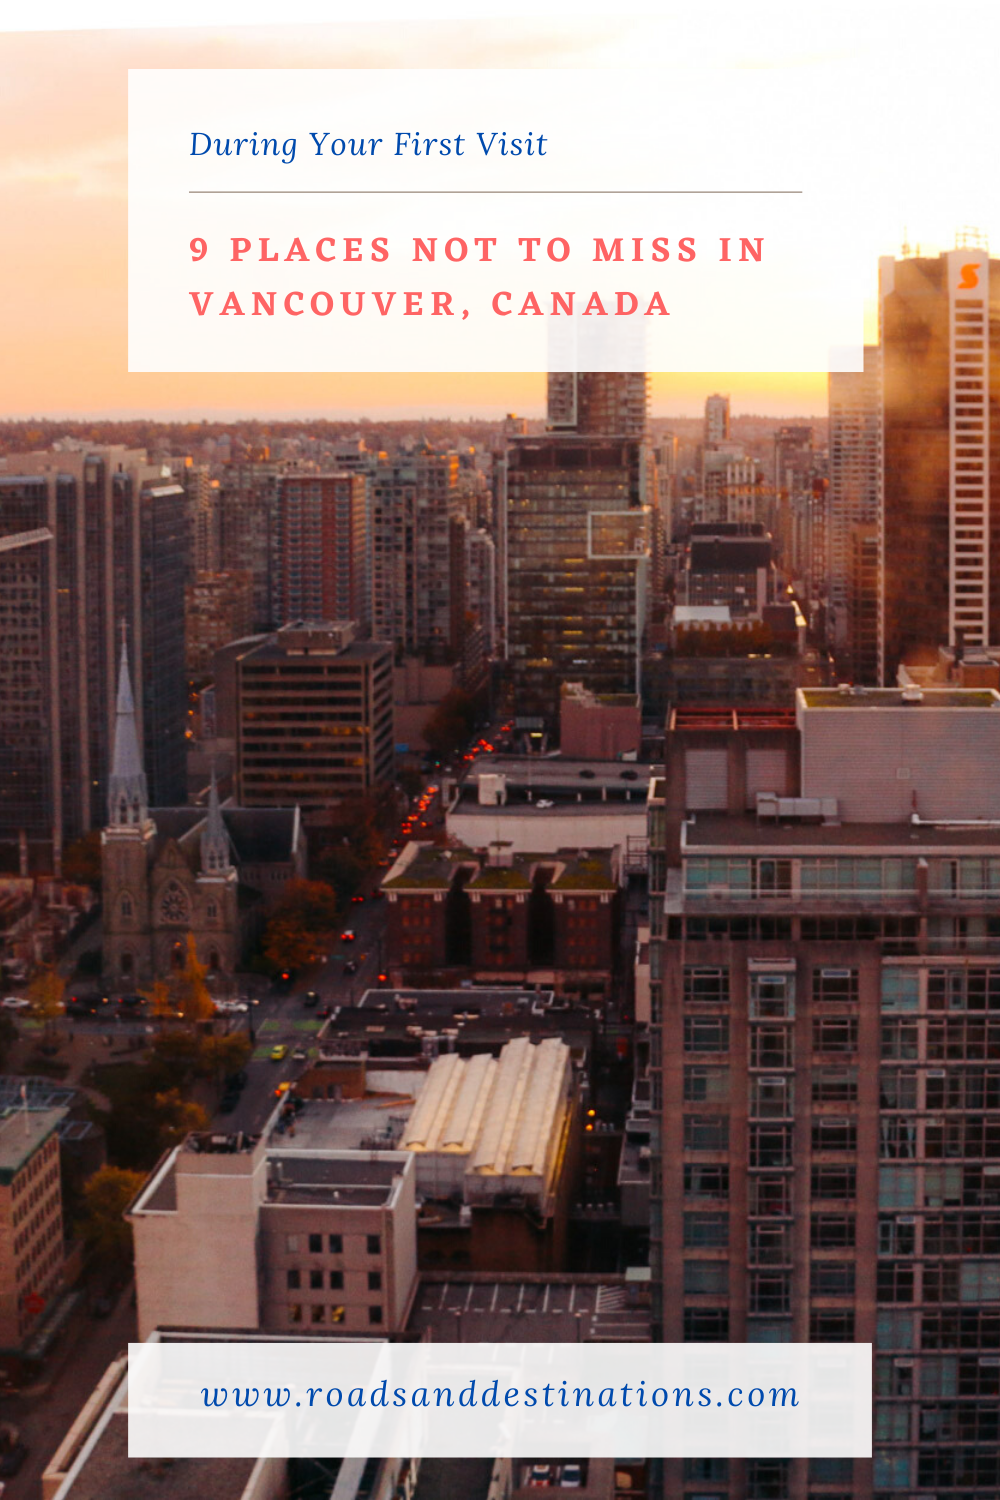 Places not to miss in Vancouver, Canada - Roads and Destinations